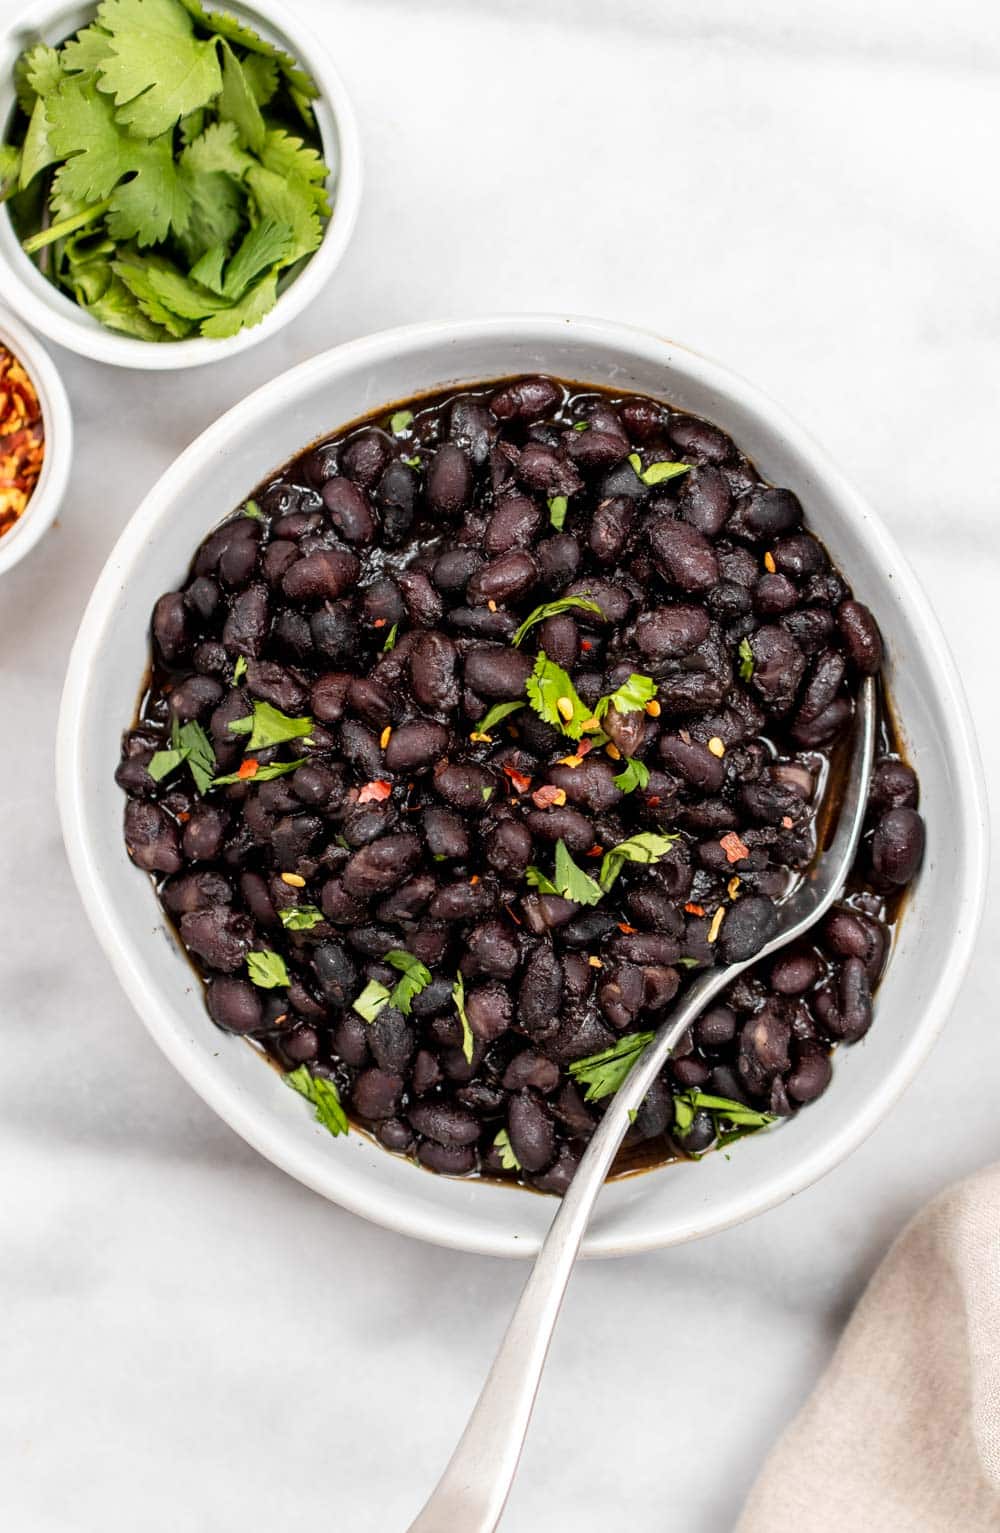 Black beans with cilantro and red pepper flakes on top.